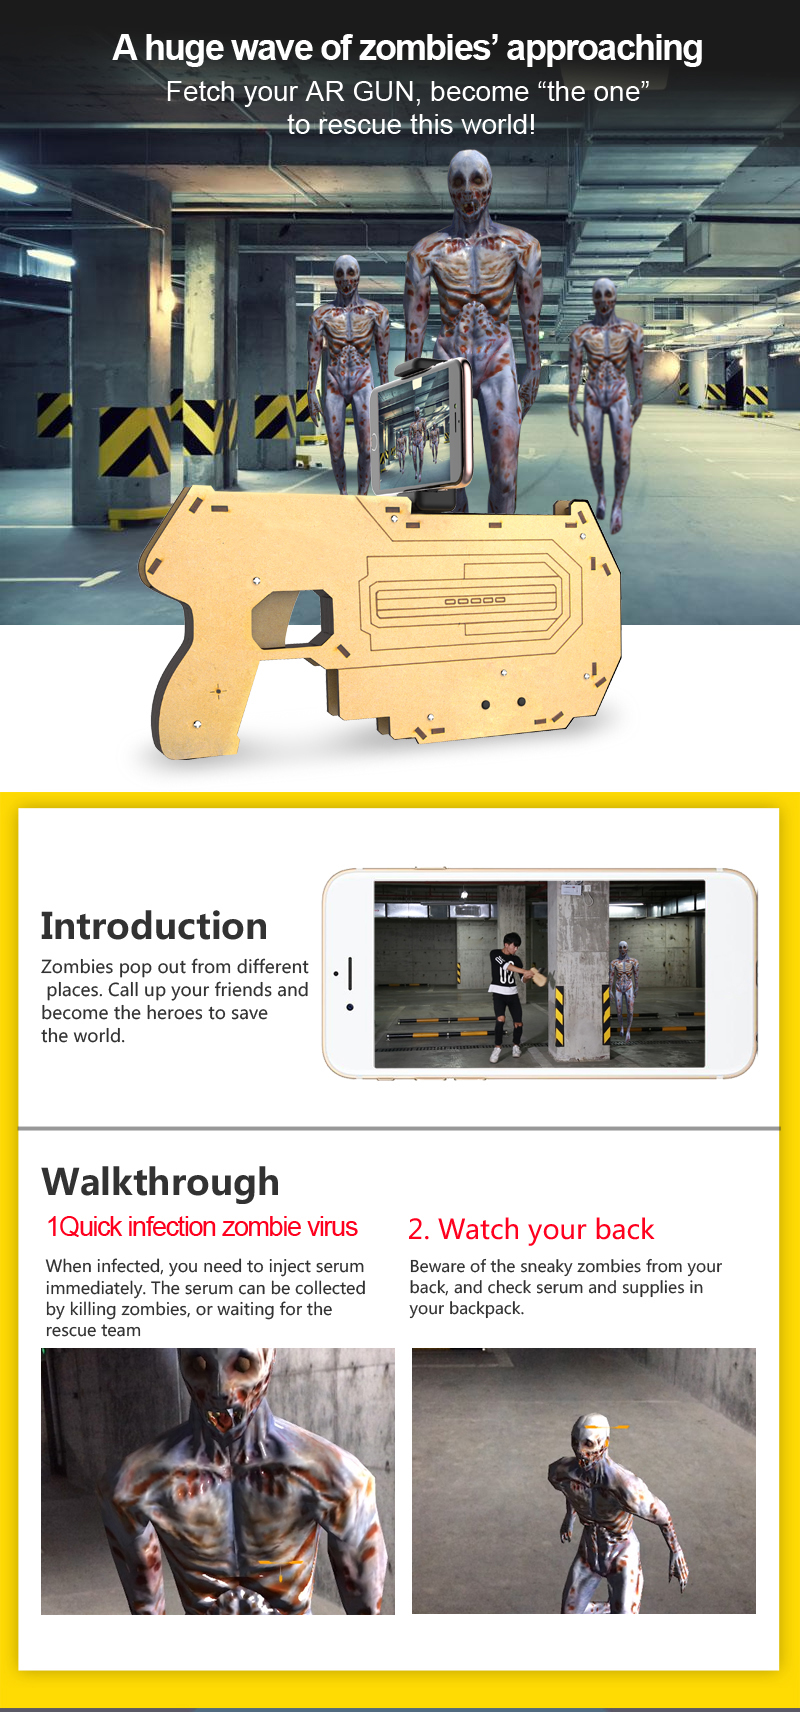 DIY-Wooden-3D-Reality-AR-Games-Bluetooth-Toy-Gun-with-Cell-Phone-Stand-Holder-for-iPhone-7-Samsung-1164654